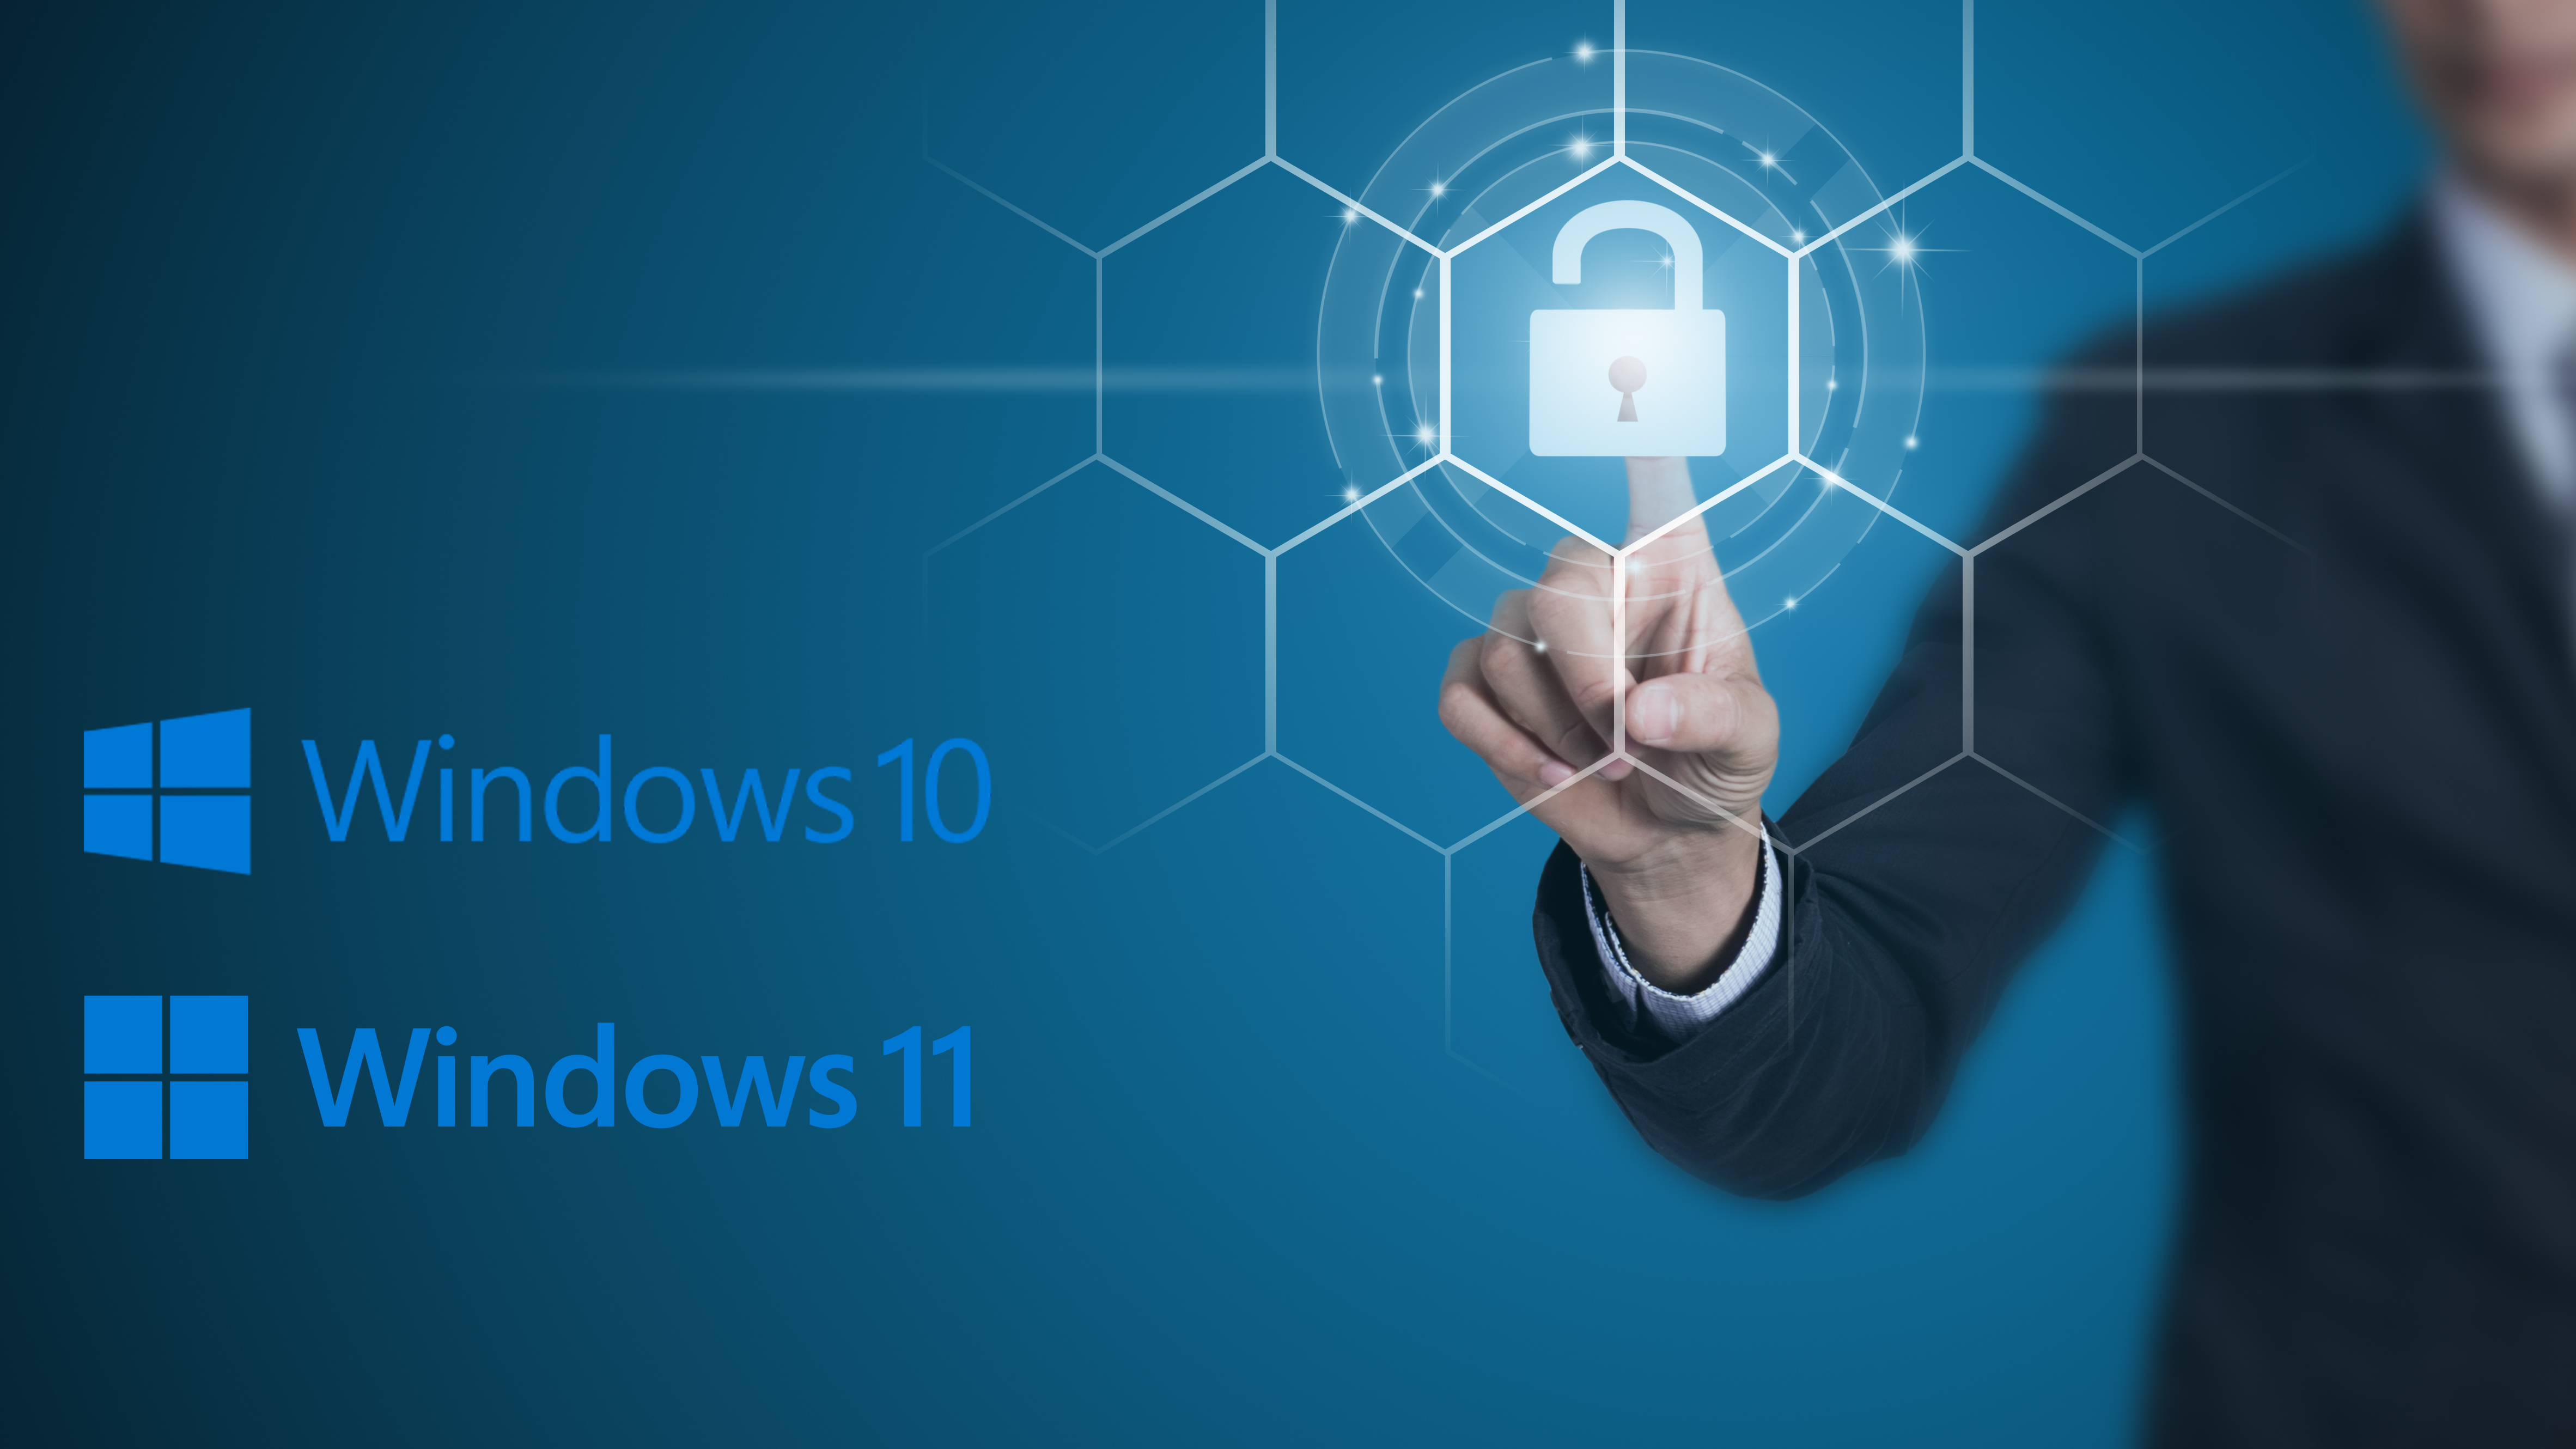 How to Find Your Original Windows 10 Product Key